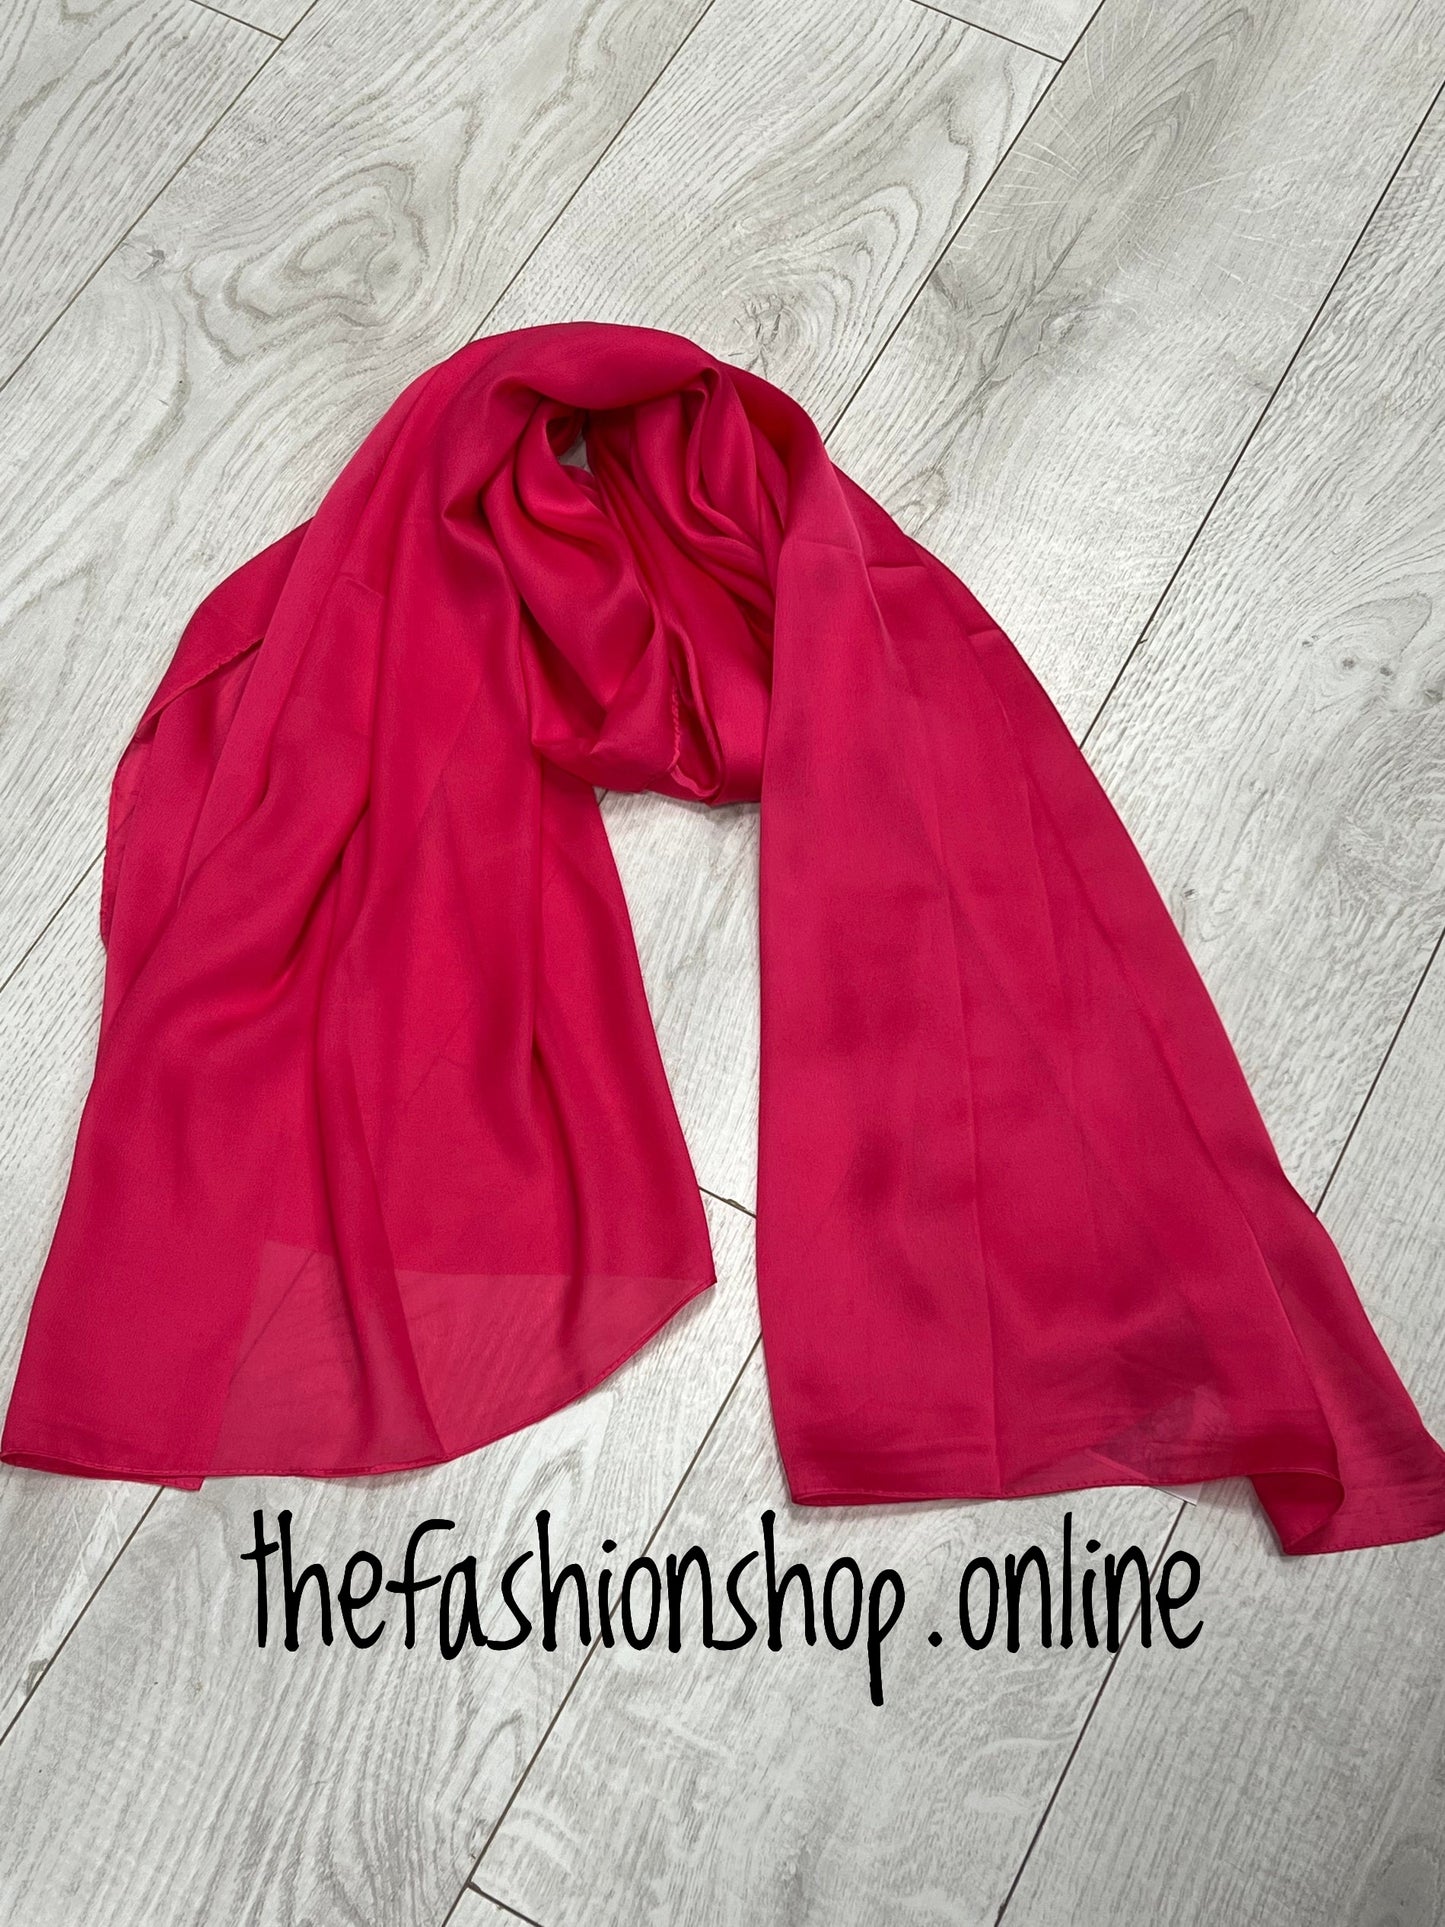 Hot pink silky scarf